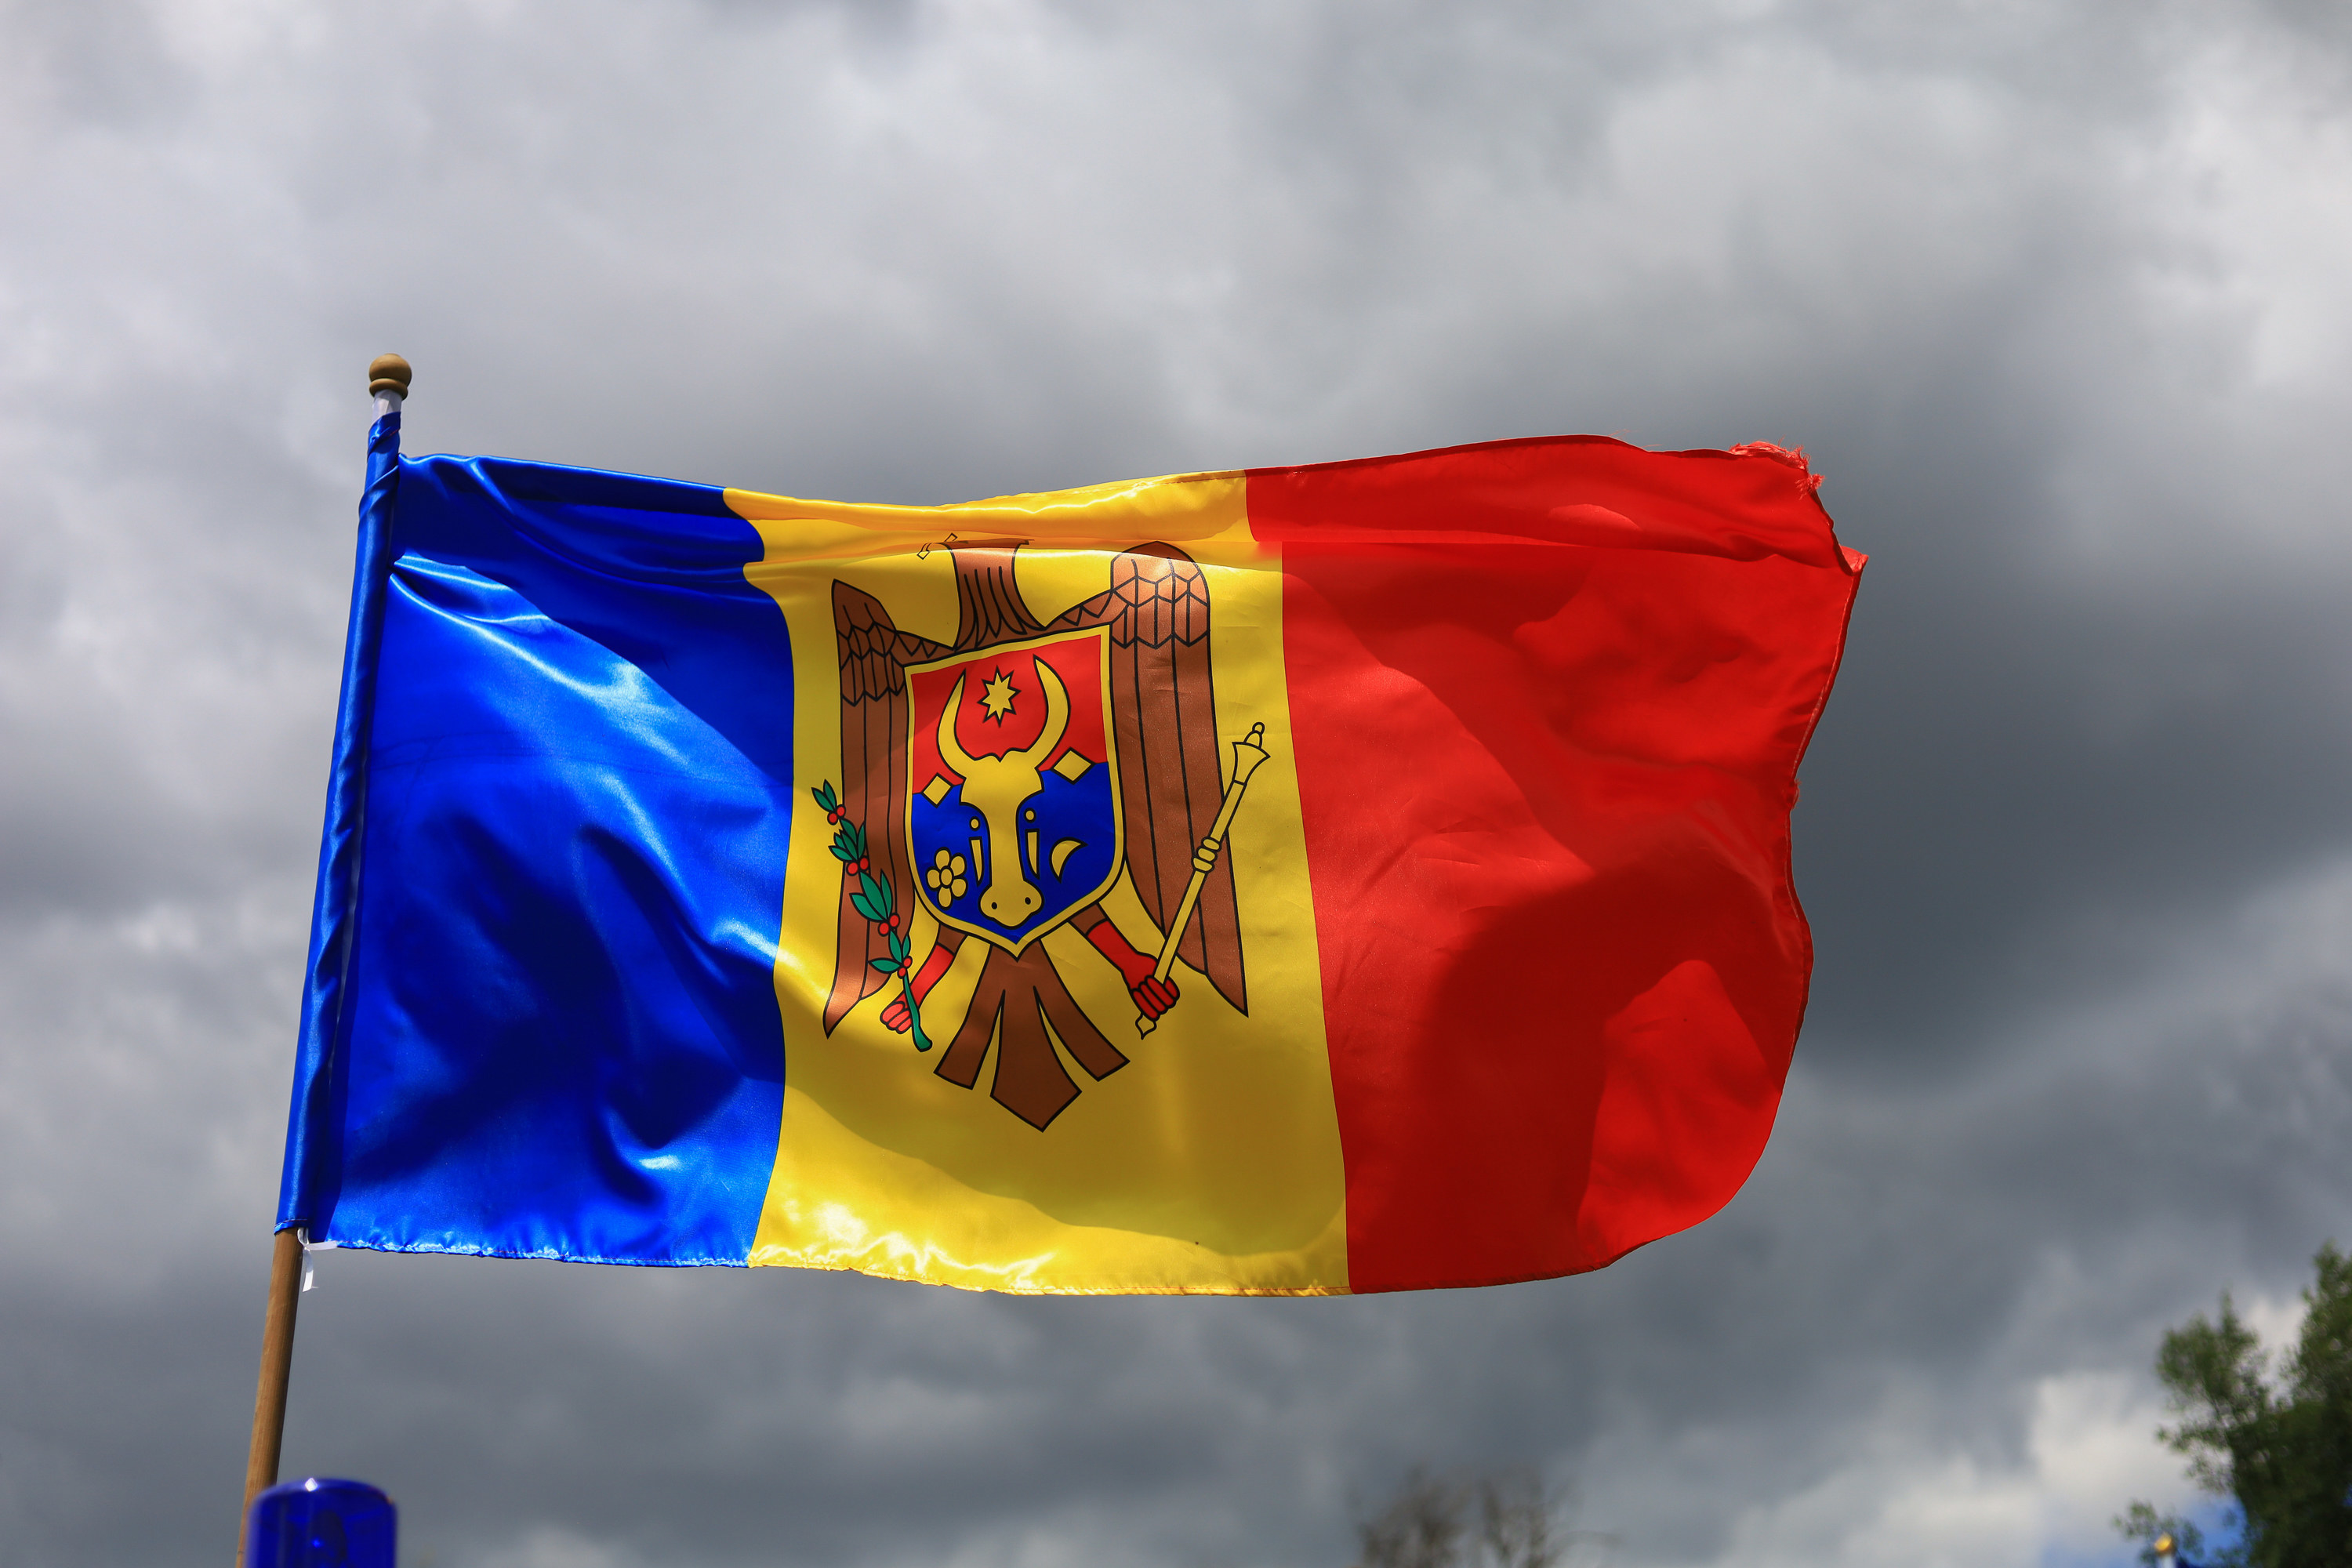 Flag of Moldova, a vertical triband of blue, yellow, and red,  with the coat of arms of Moldova (an eagle holding a shield)